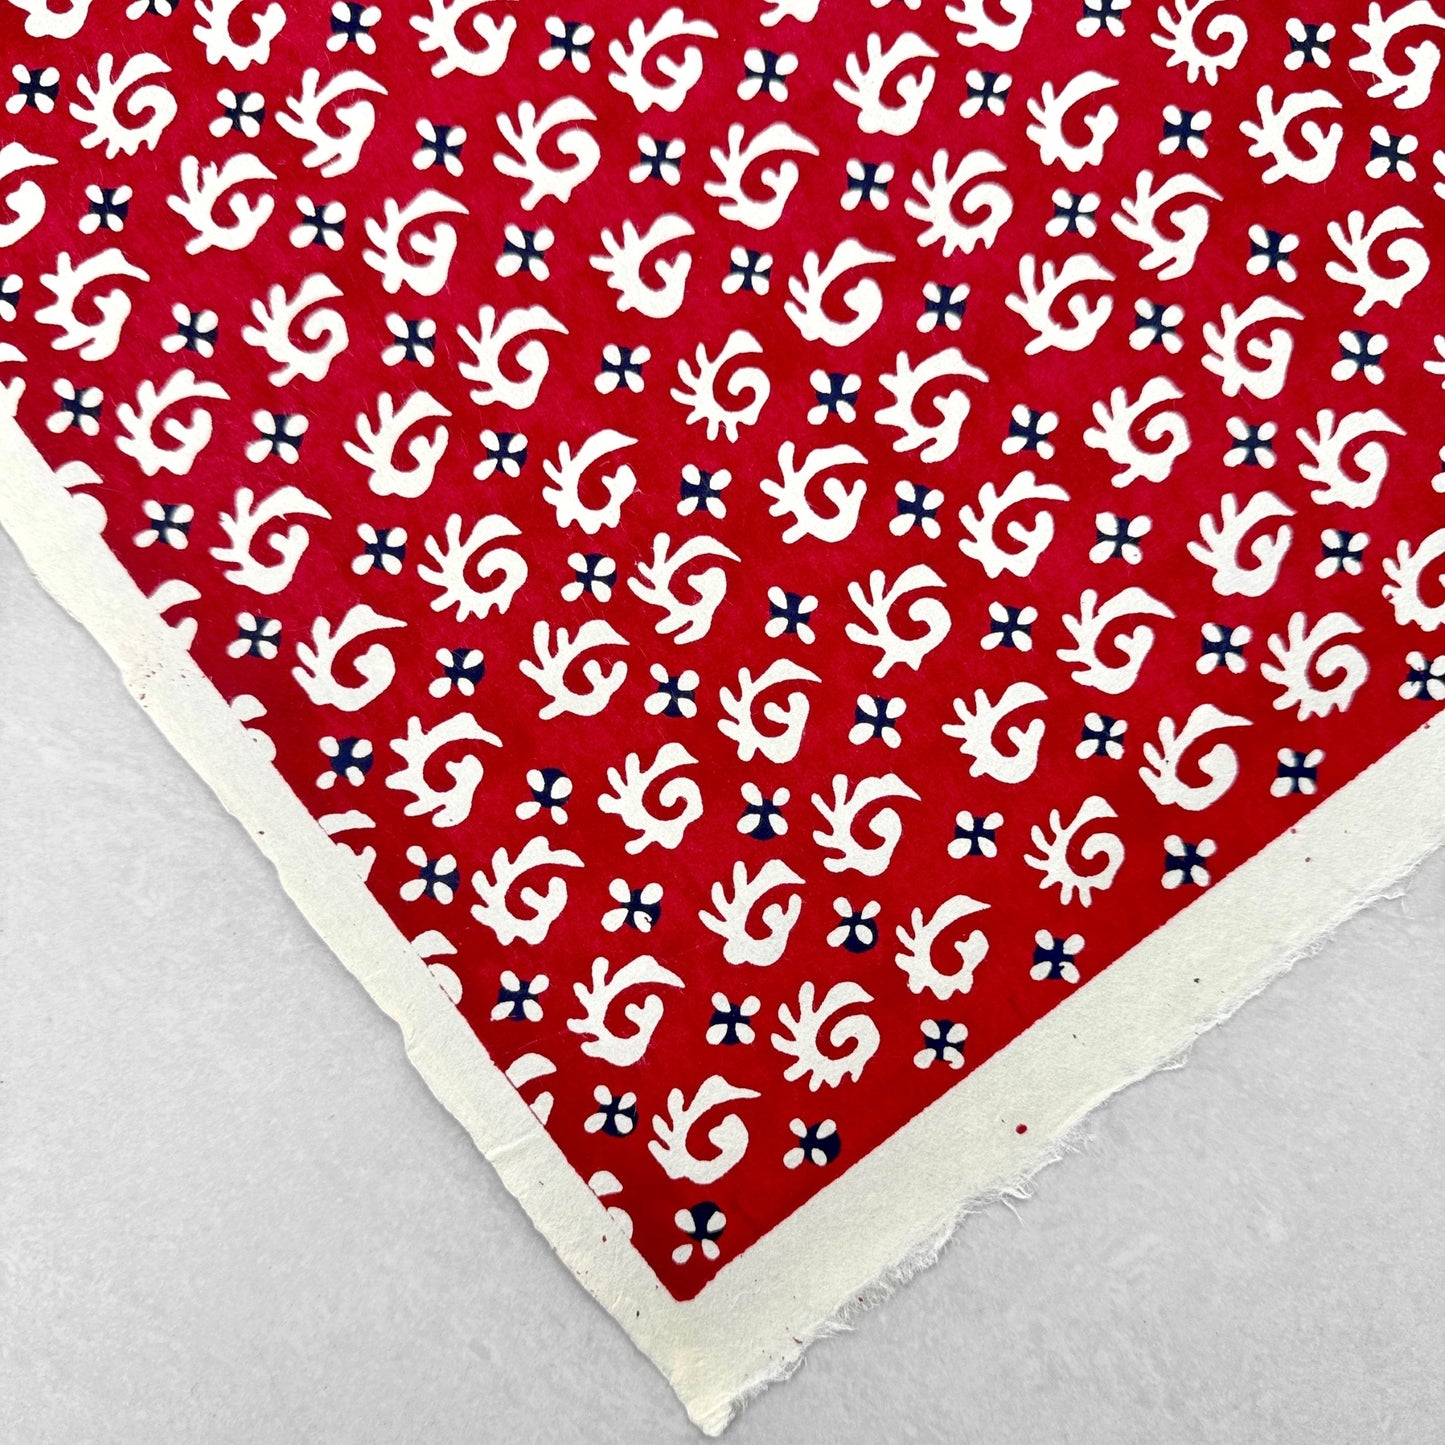 A Japanese stencil-dyed patterned paper with a repeat pattern in white on a deep rich red background. Flat view